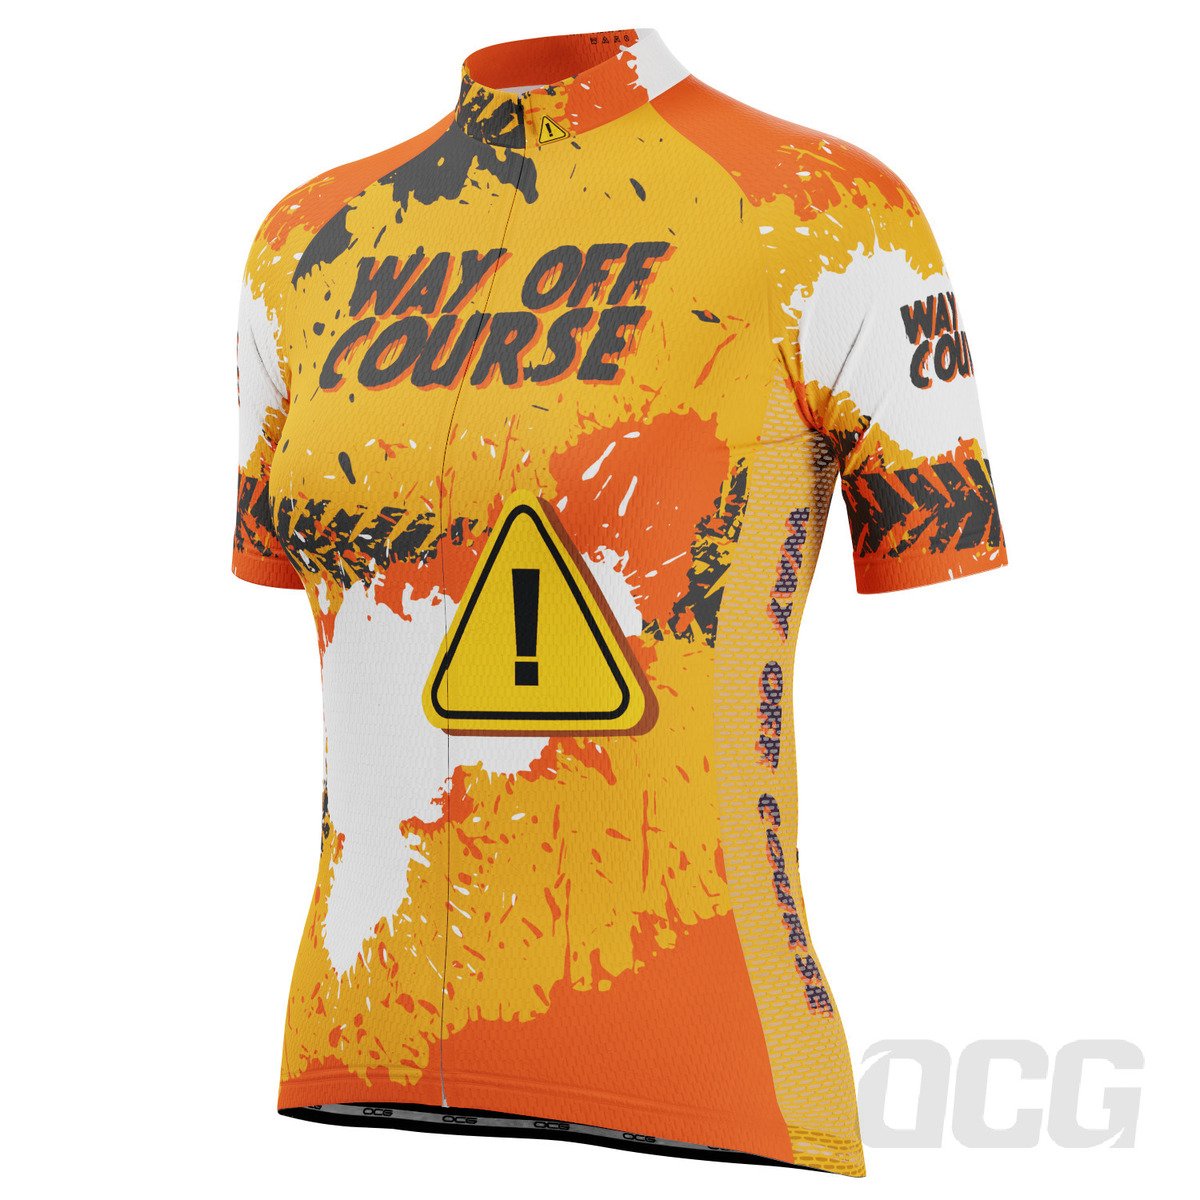 Women's Way Off Course Short Sleeve Cycling Jersey